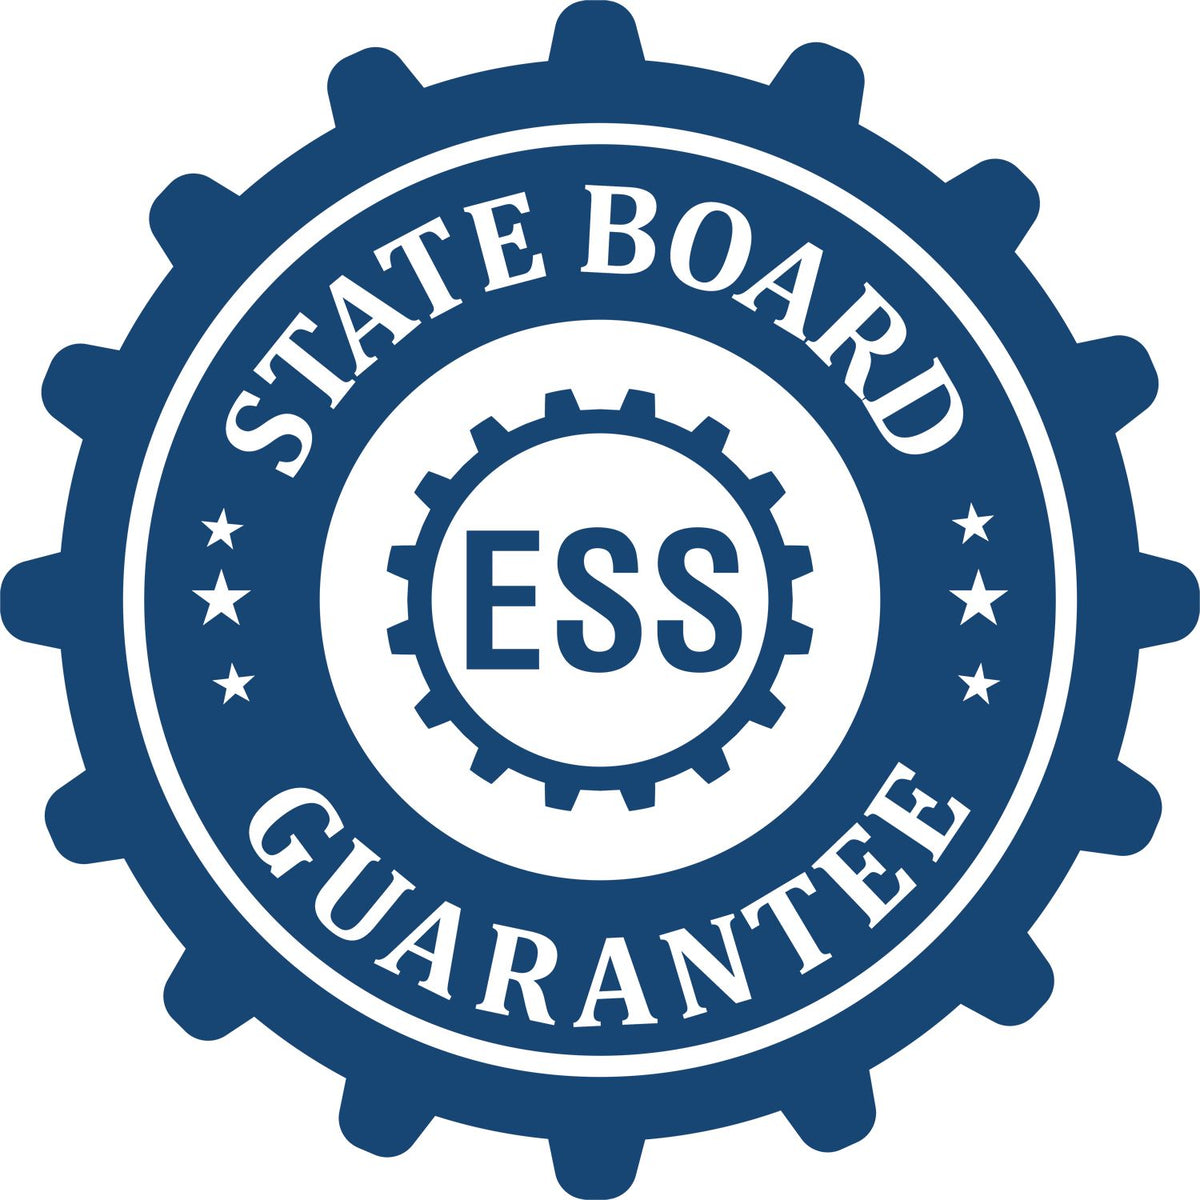 An emblem in a gear shape illustrating a state board guarantee for the Premium MaxLight Pre-Inked Alaska Landscape Architectural Stamp product.